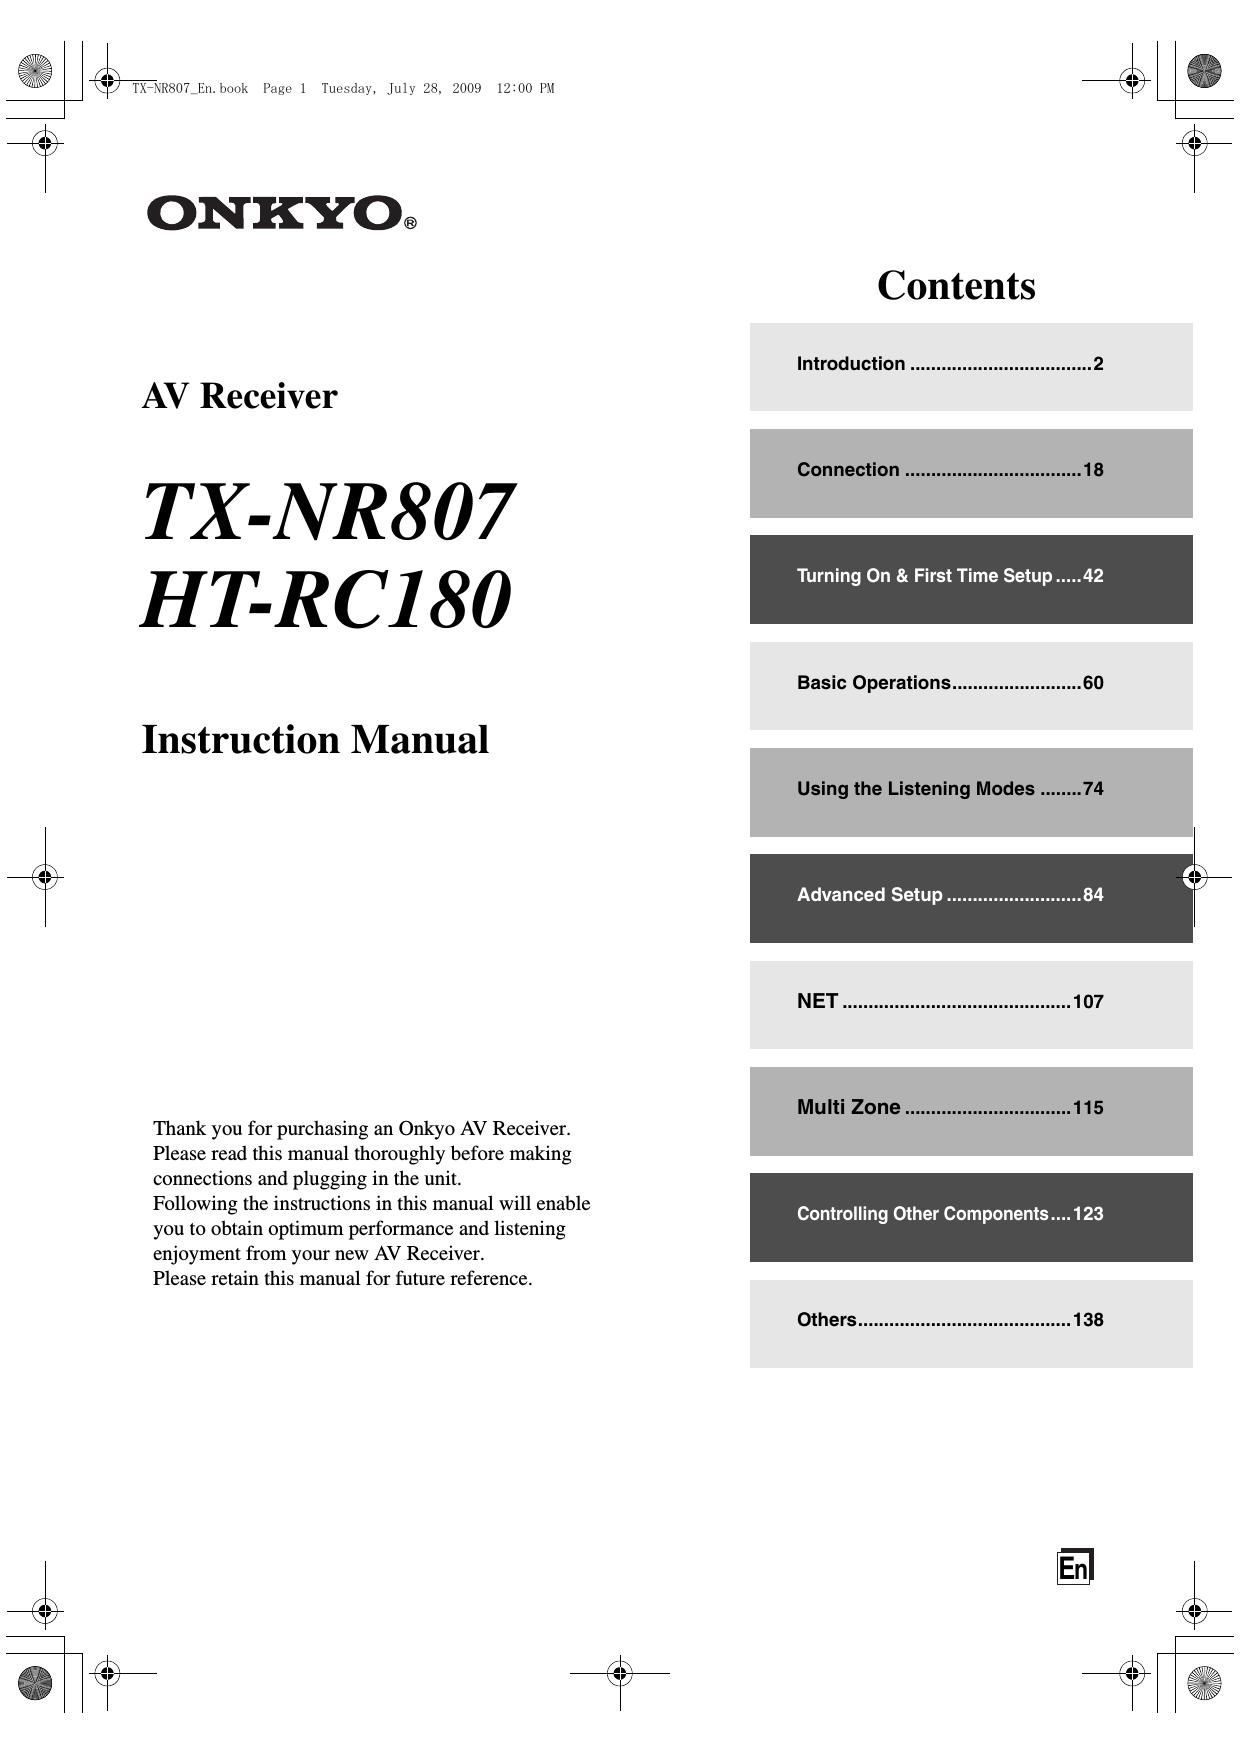 Onkyo HTRC 180 Owners Manual